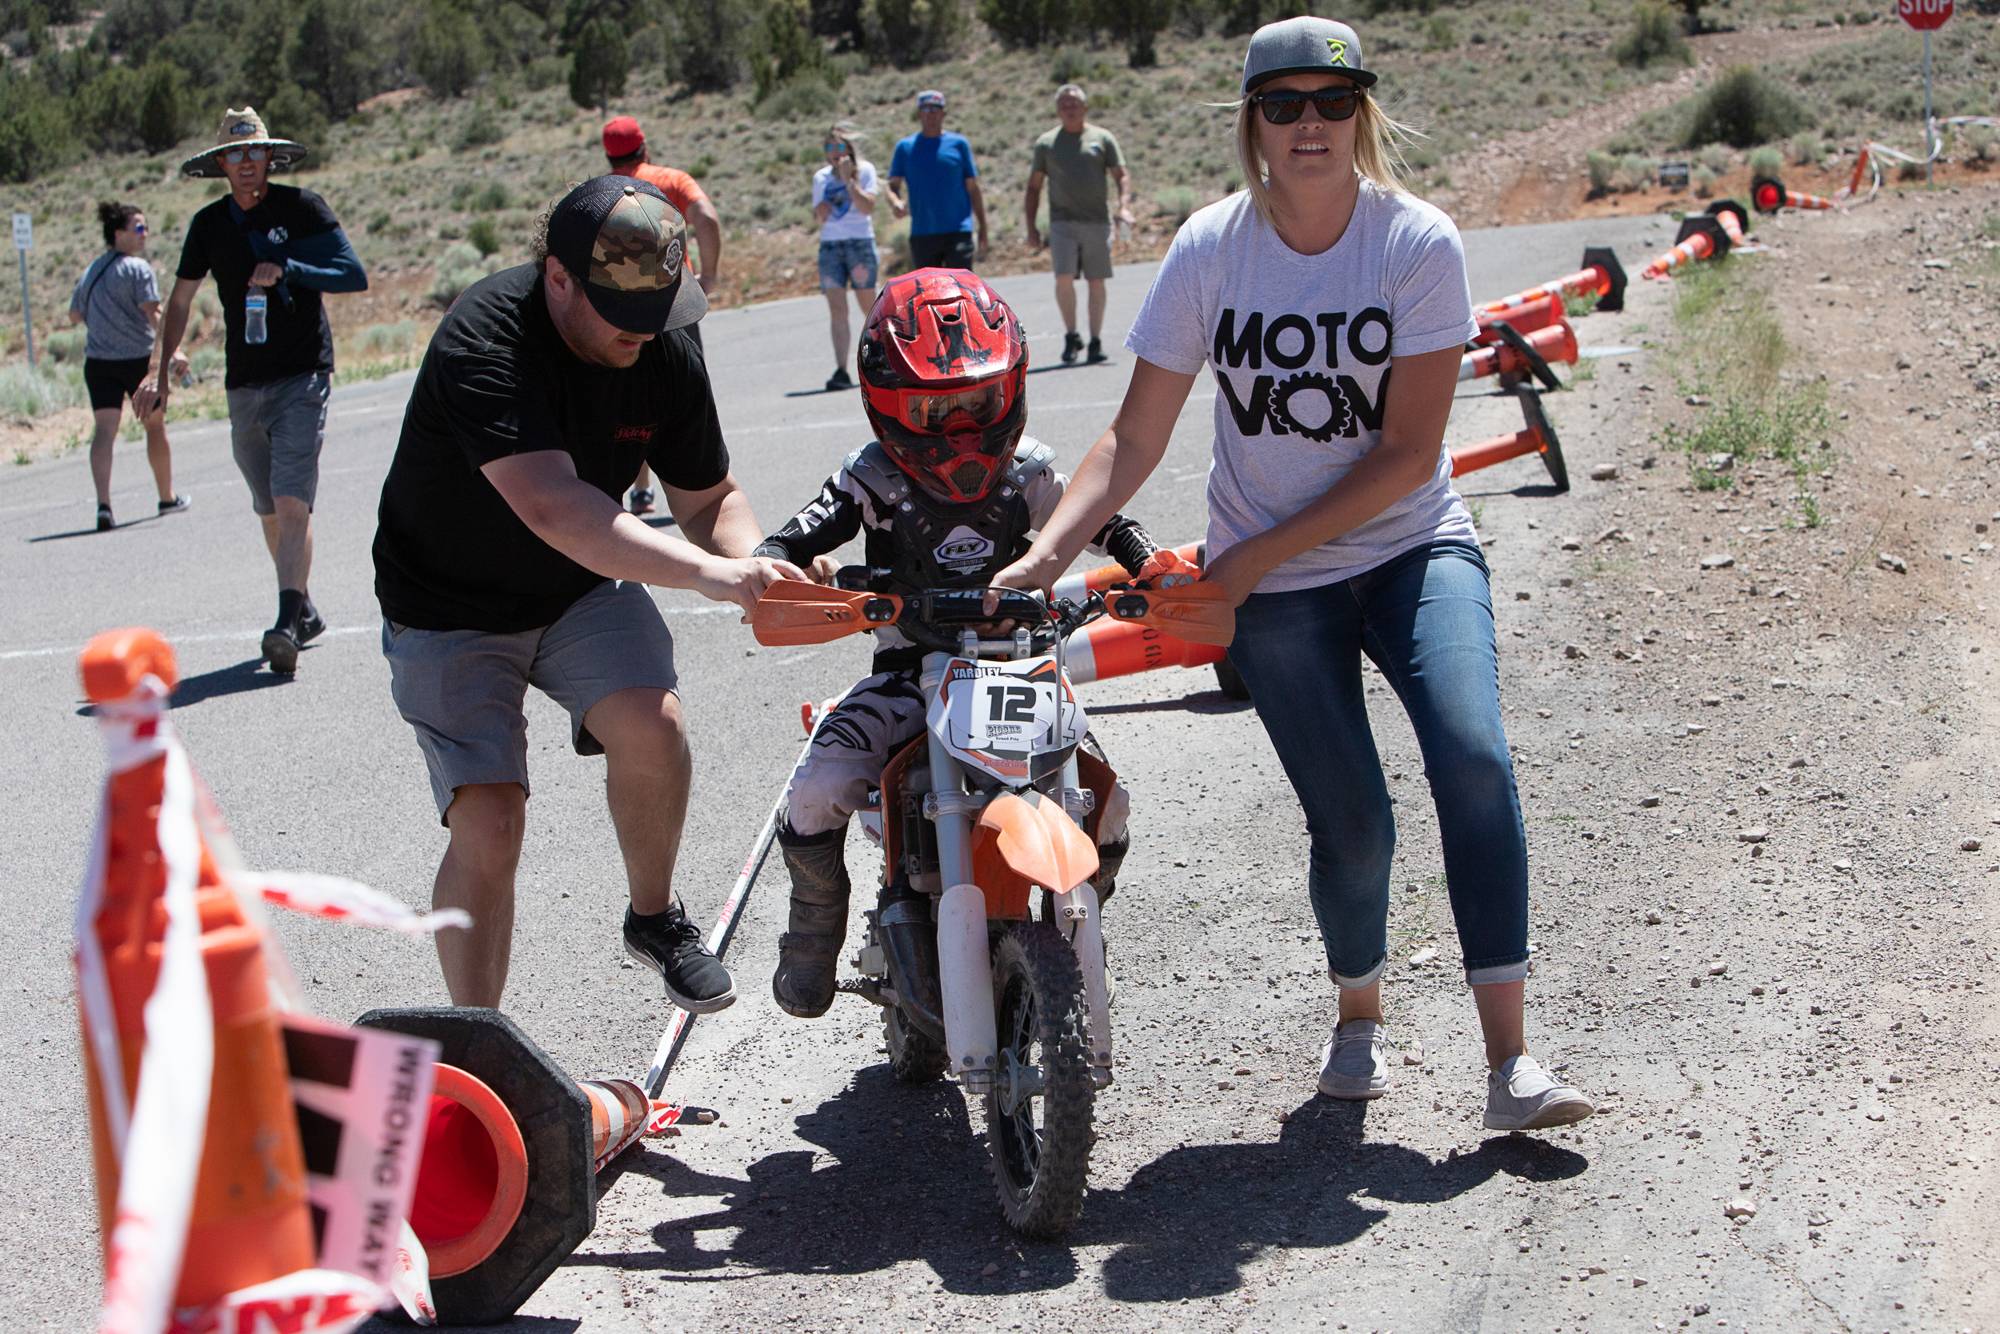 Grant Yardley is helped through the timing gate so his teammate can start their lap during the P-Wee team race at the Pioche Grand Prix in Pioche, Nevada, on Sunday, June 12, 2022.